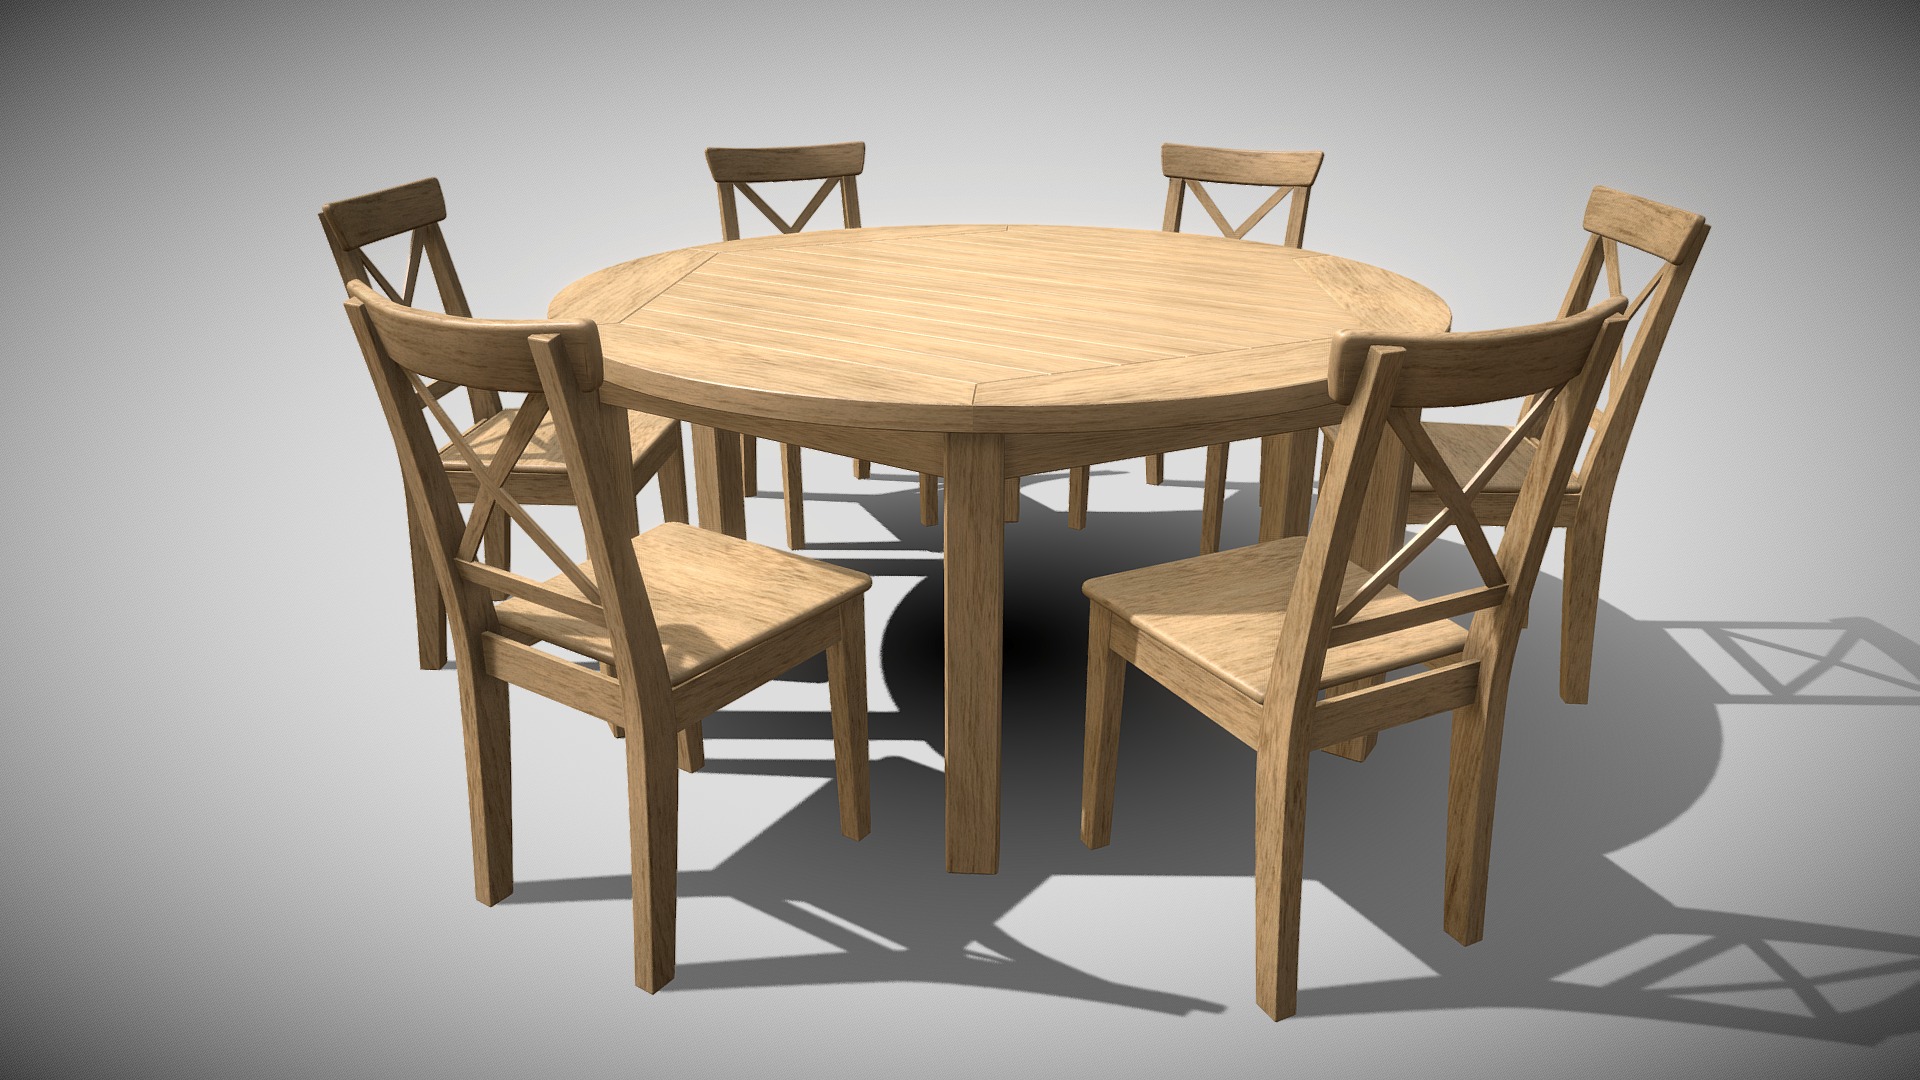 3D model Garden Furniture 6 person - This is a 3D model of the Garden Furniture 6 person. The 3D model is about a table with chairs around it.